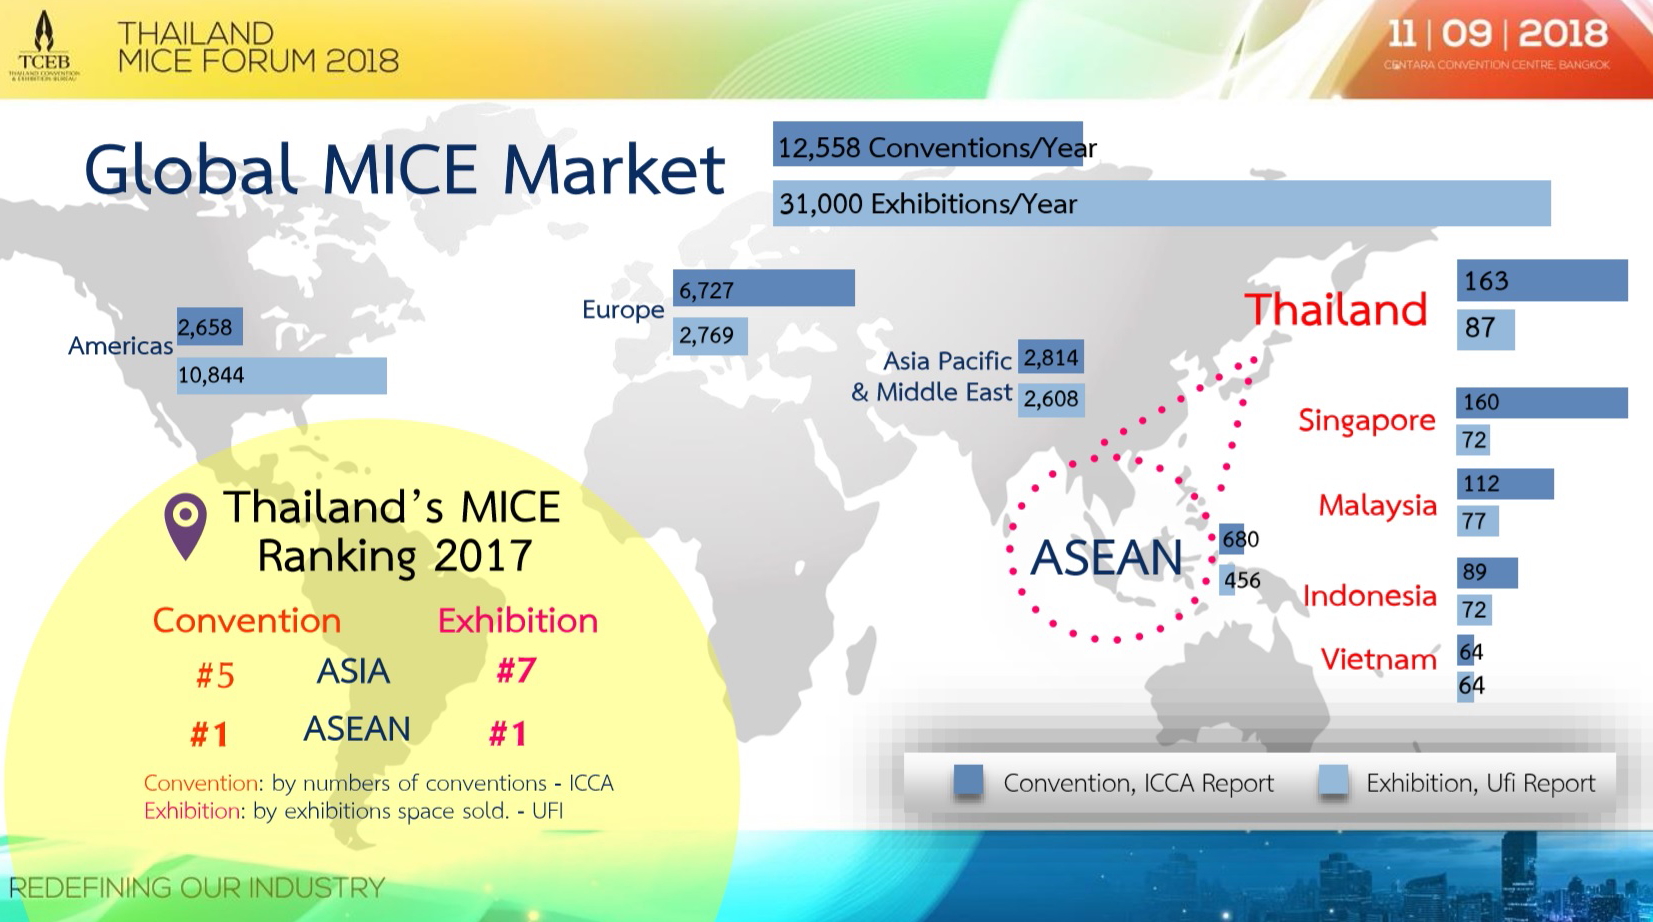 According to TCEB, Thailand welcomed 1,276,411 international MICE travellers in 2017 and has a target of 1,327,000 for 2018. The target for 2019 is 1,419,890. Revenue generated by these international MICE travellers in 2017 reached 106,912 million Baht with 2018 expected to hit  124,000 million Baht, while 2019 has a revenue target of 130,200 million Baht. Click to enlarge.